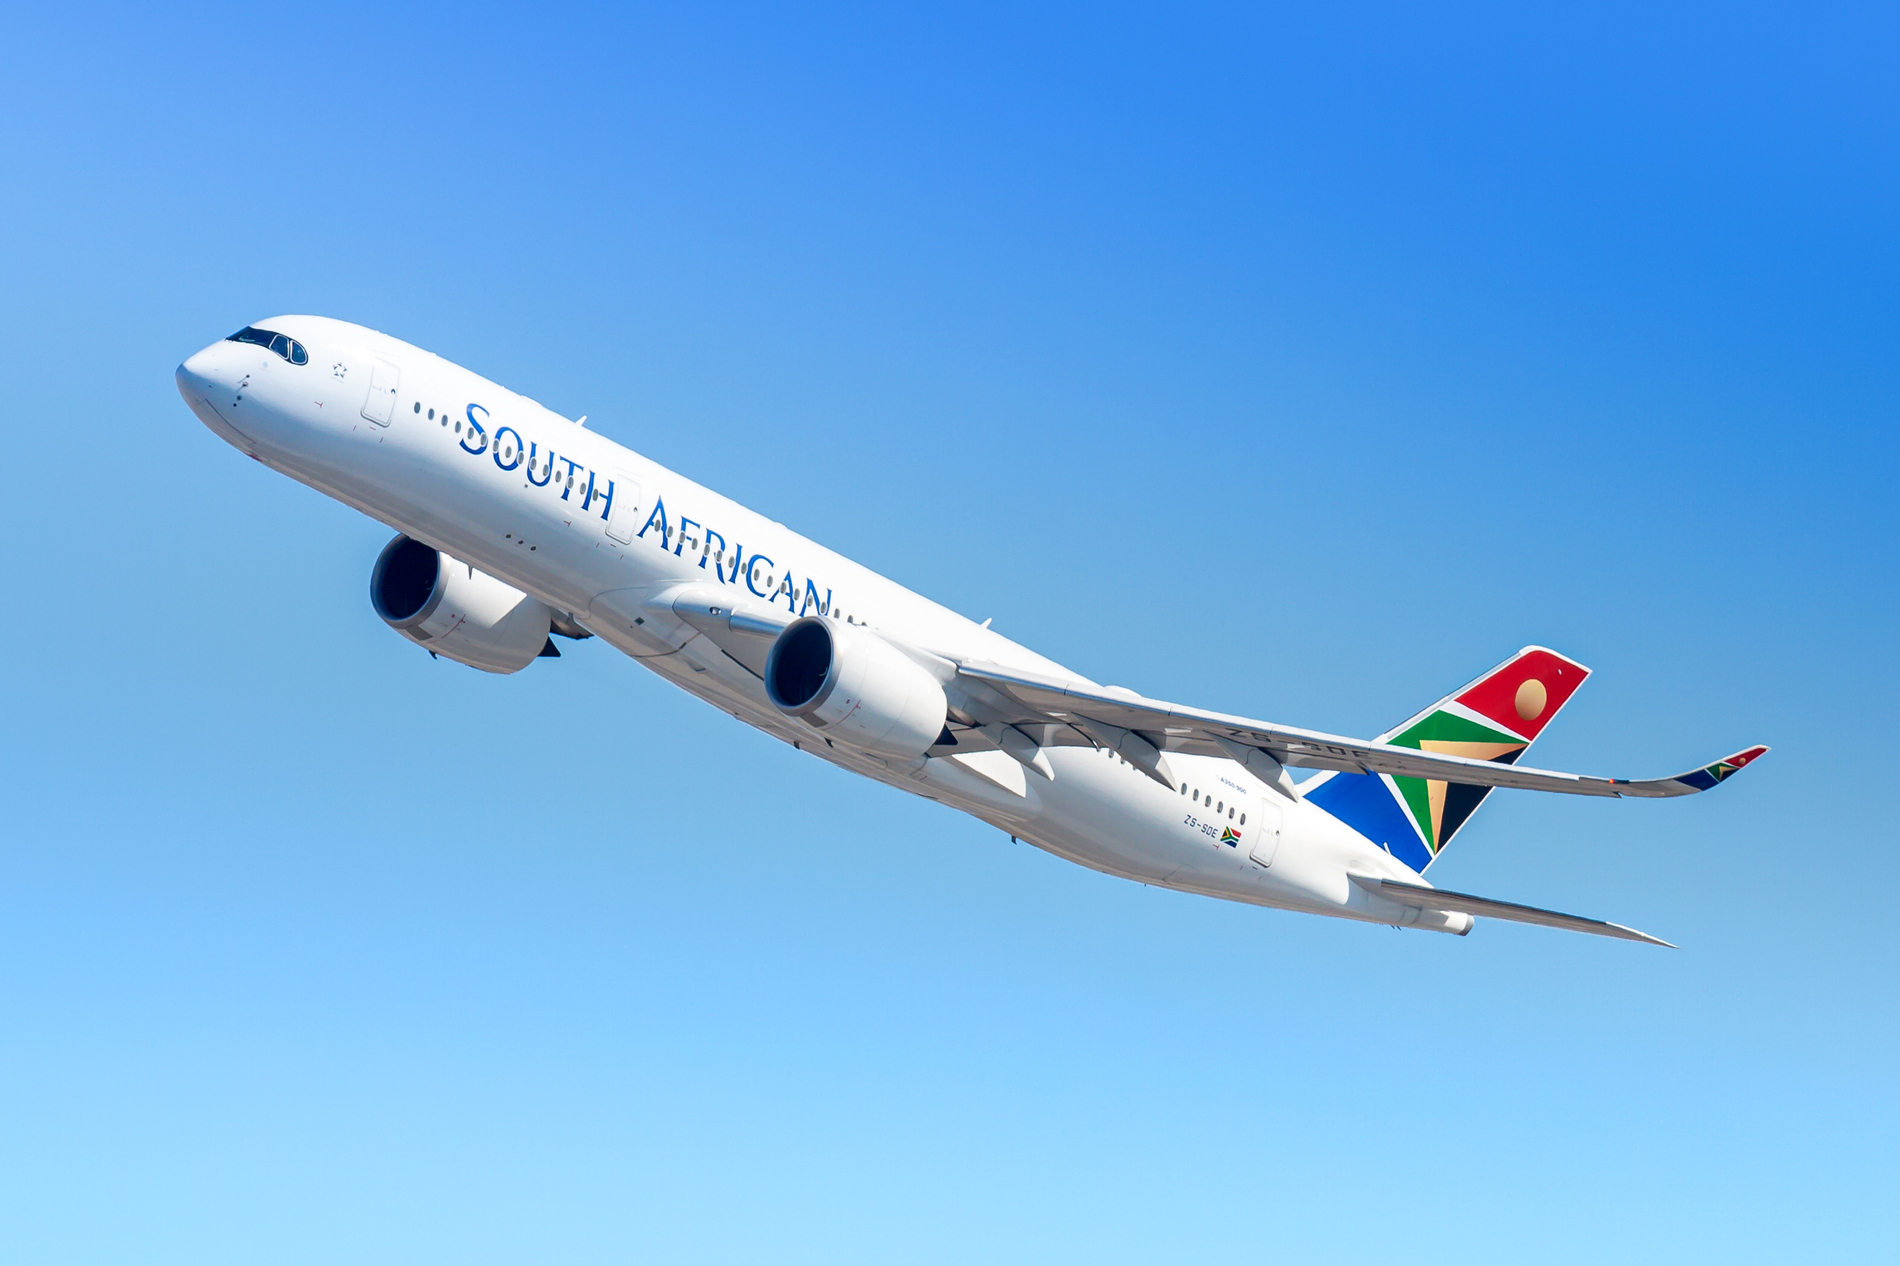 SAA Launches Route to ABIDJAN, Cote d'Ivoire